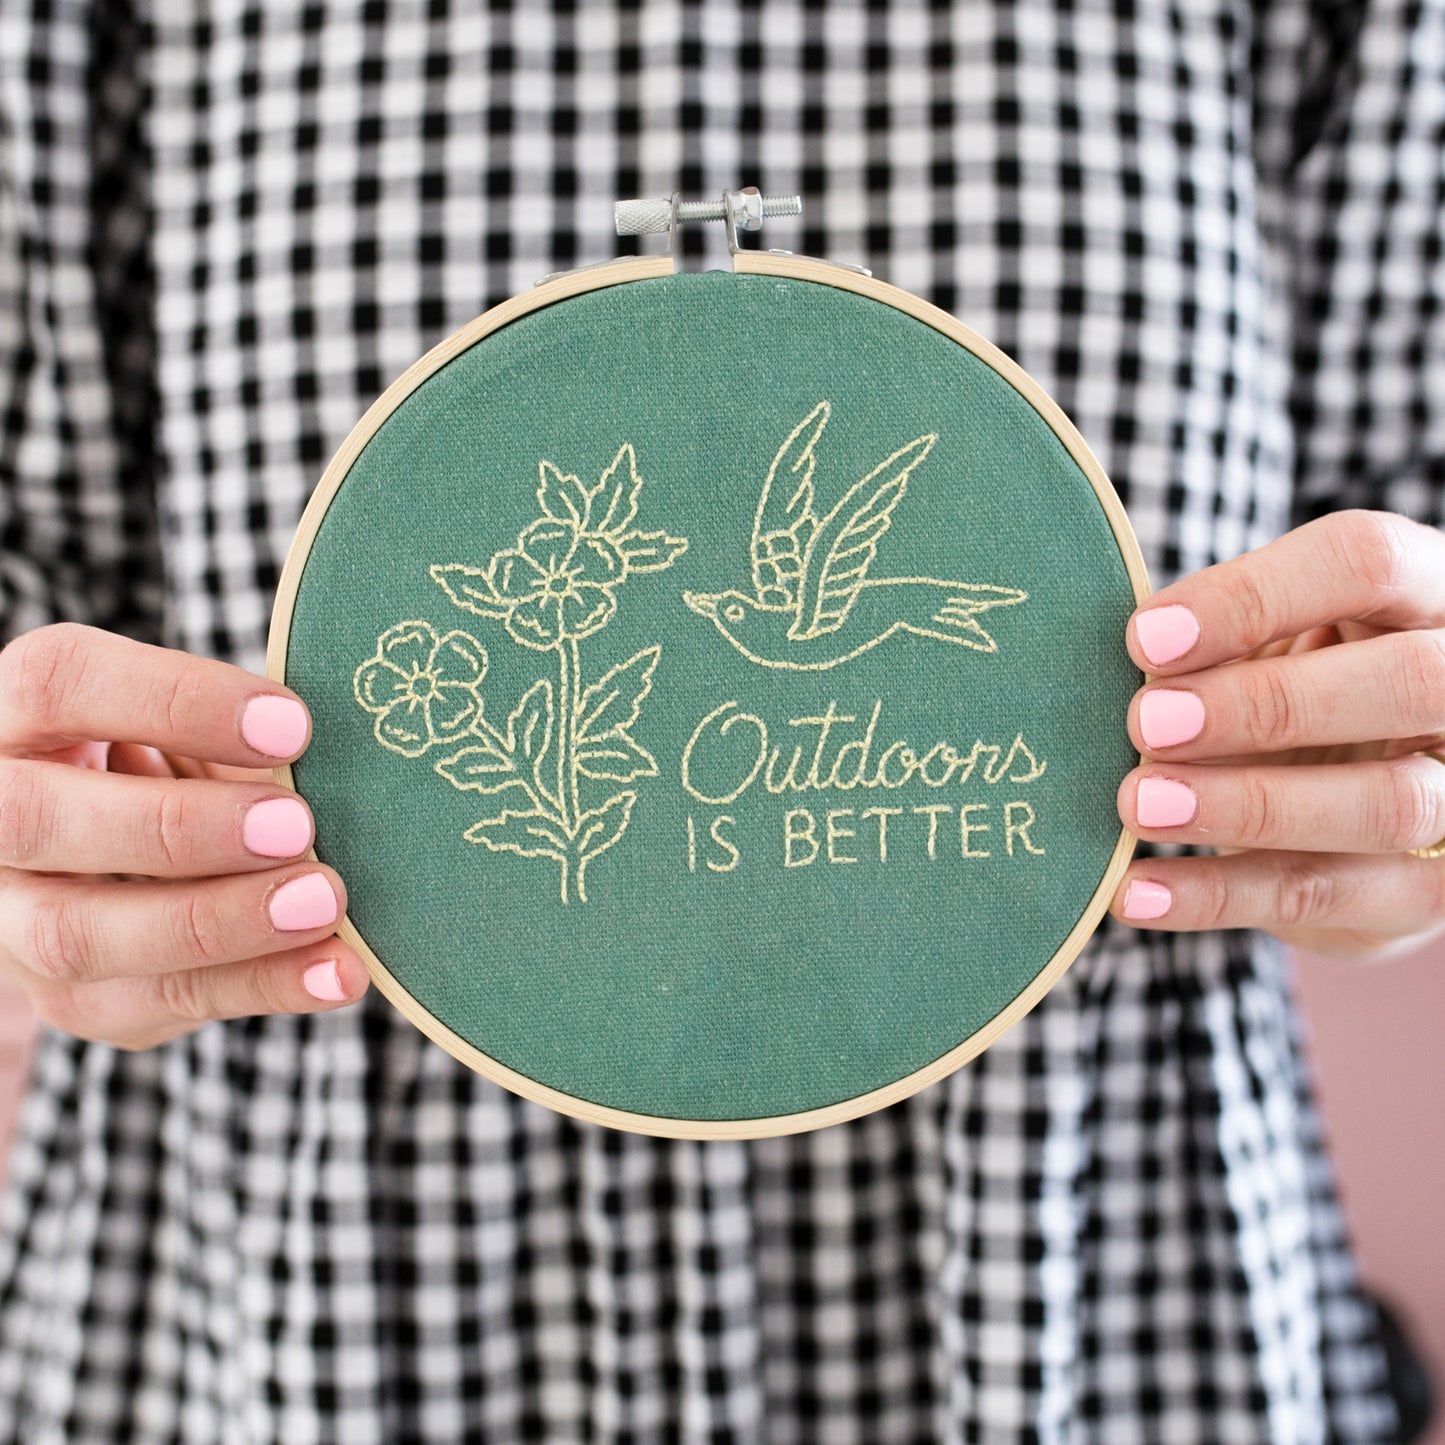 Cotton Clara Outdoors Is Better Embroidery Hoop Kit